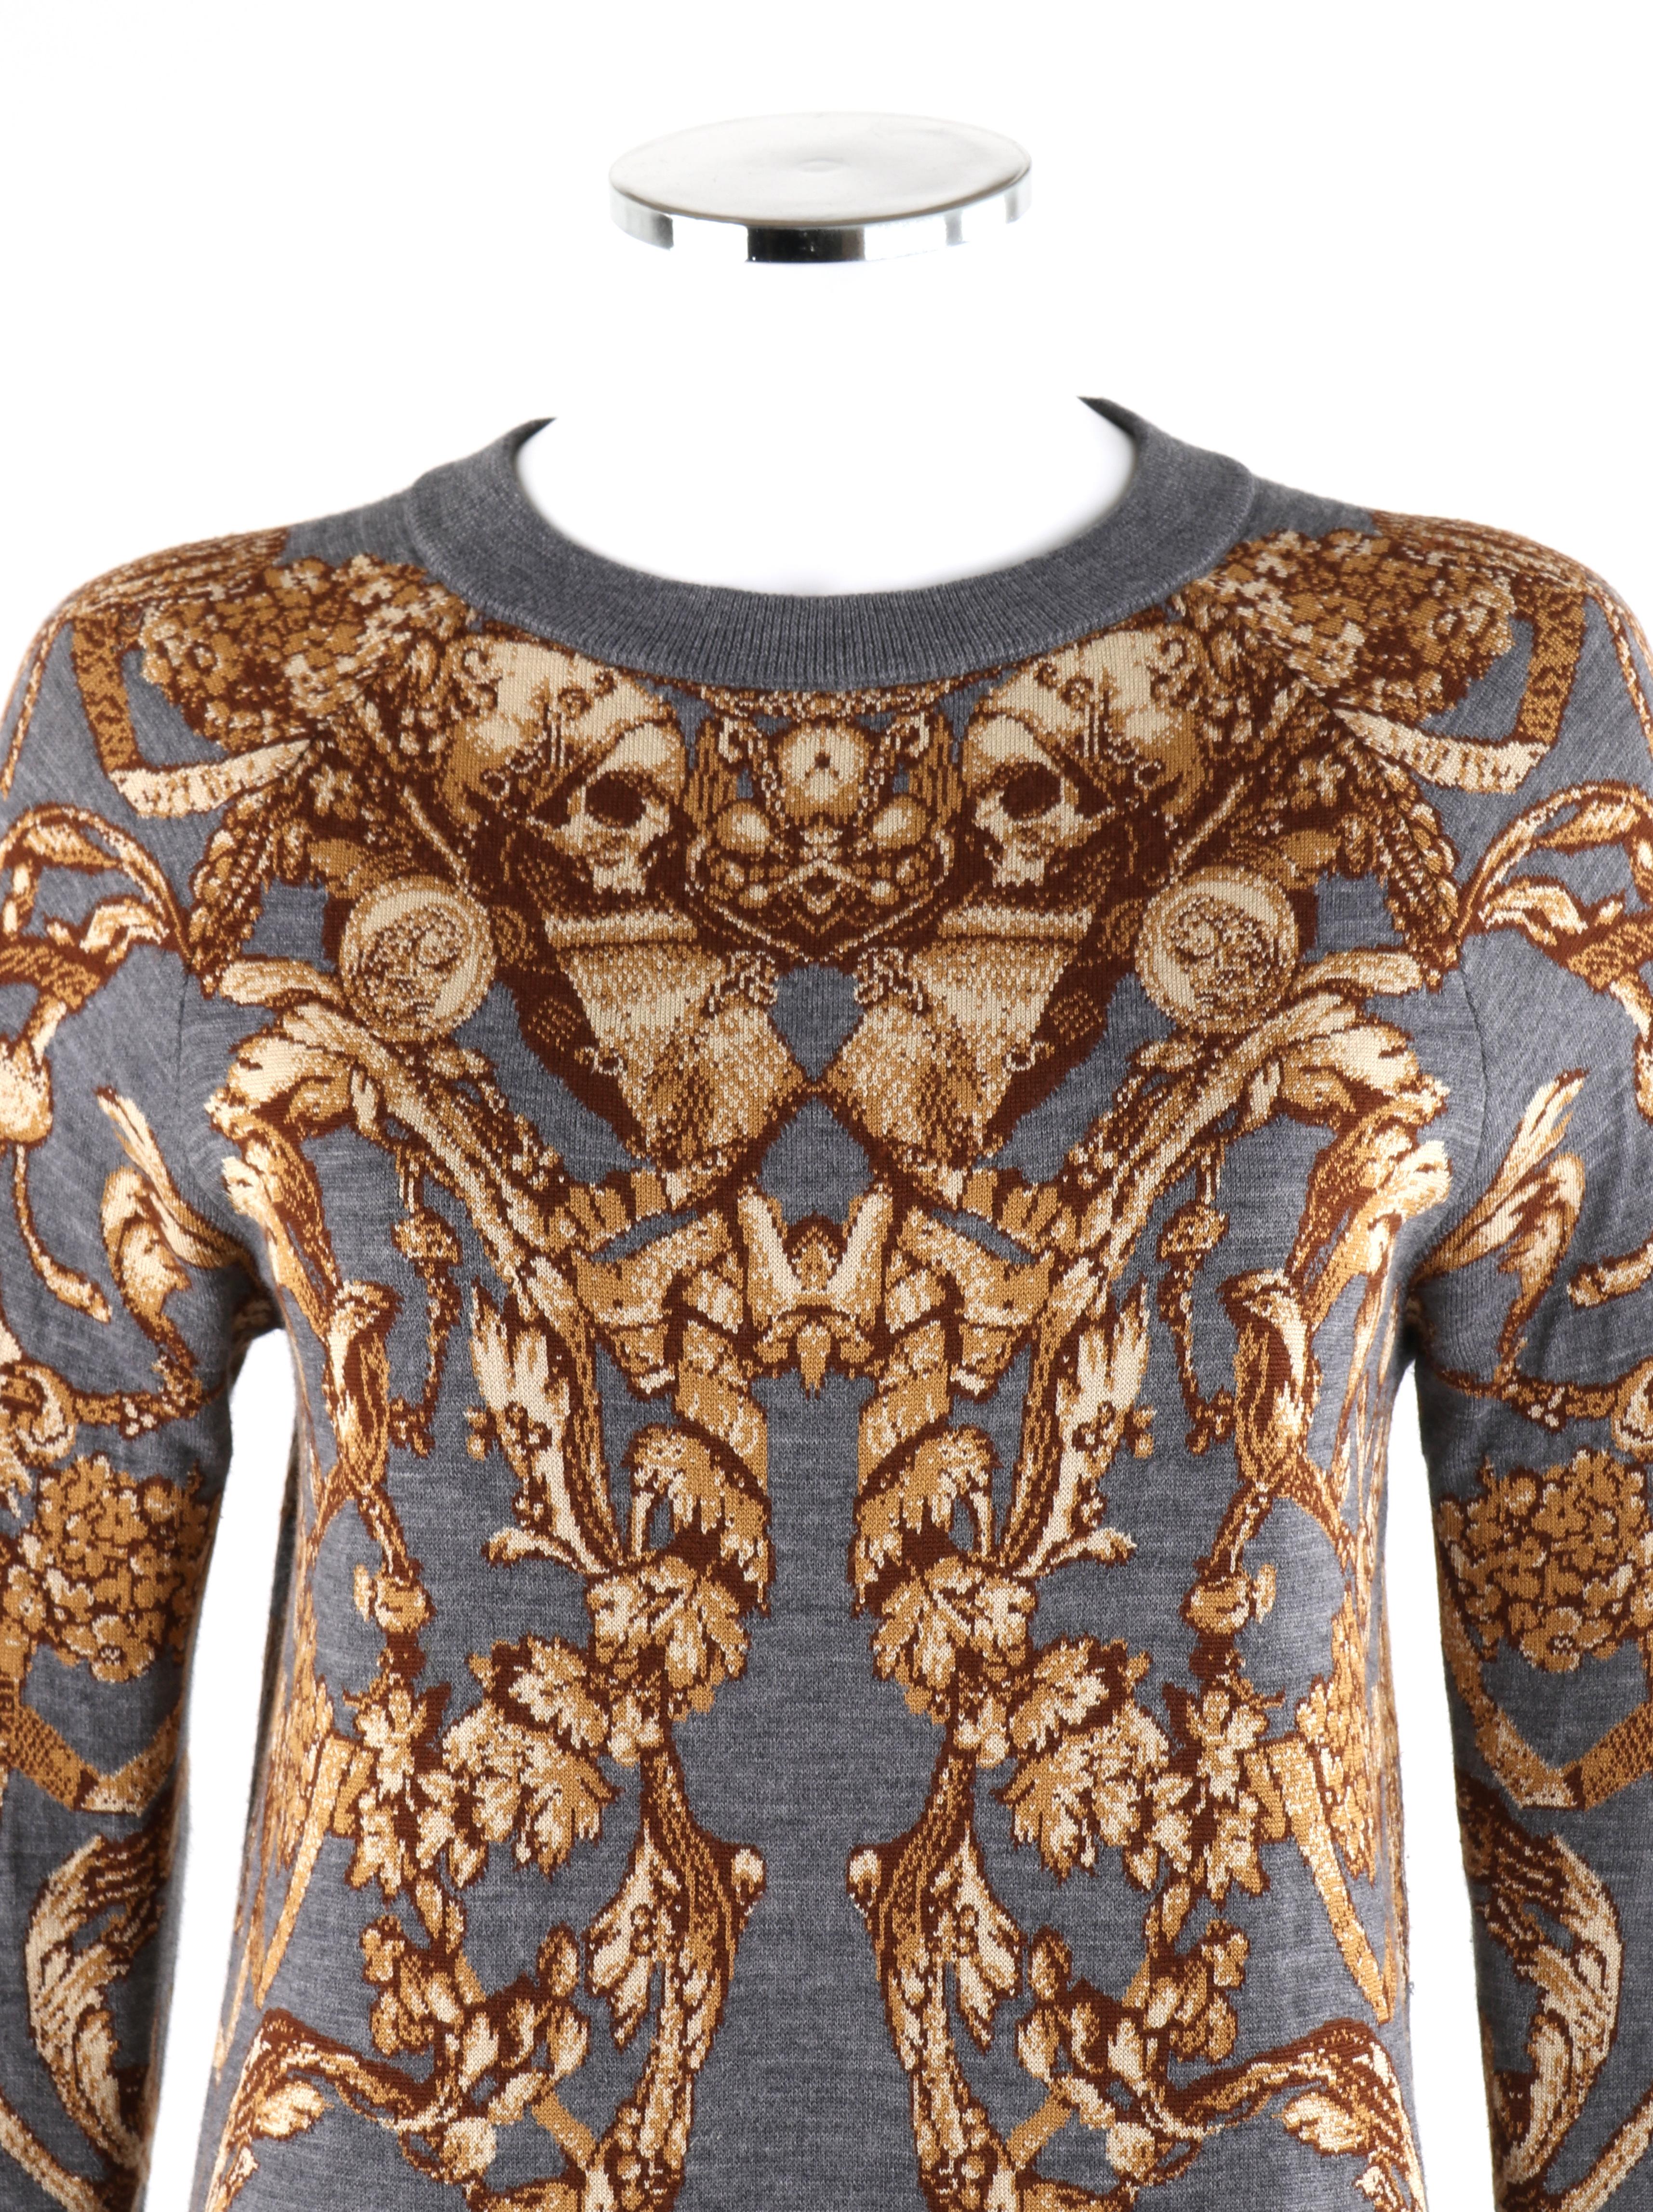 ALEXANDER McQUEEN c.2010 “Angels & Demons” Grinling Gibbons Shift Knit Dress  In Good Condition For Sale In Thiensville, WI